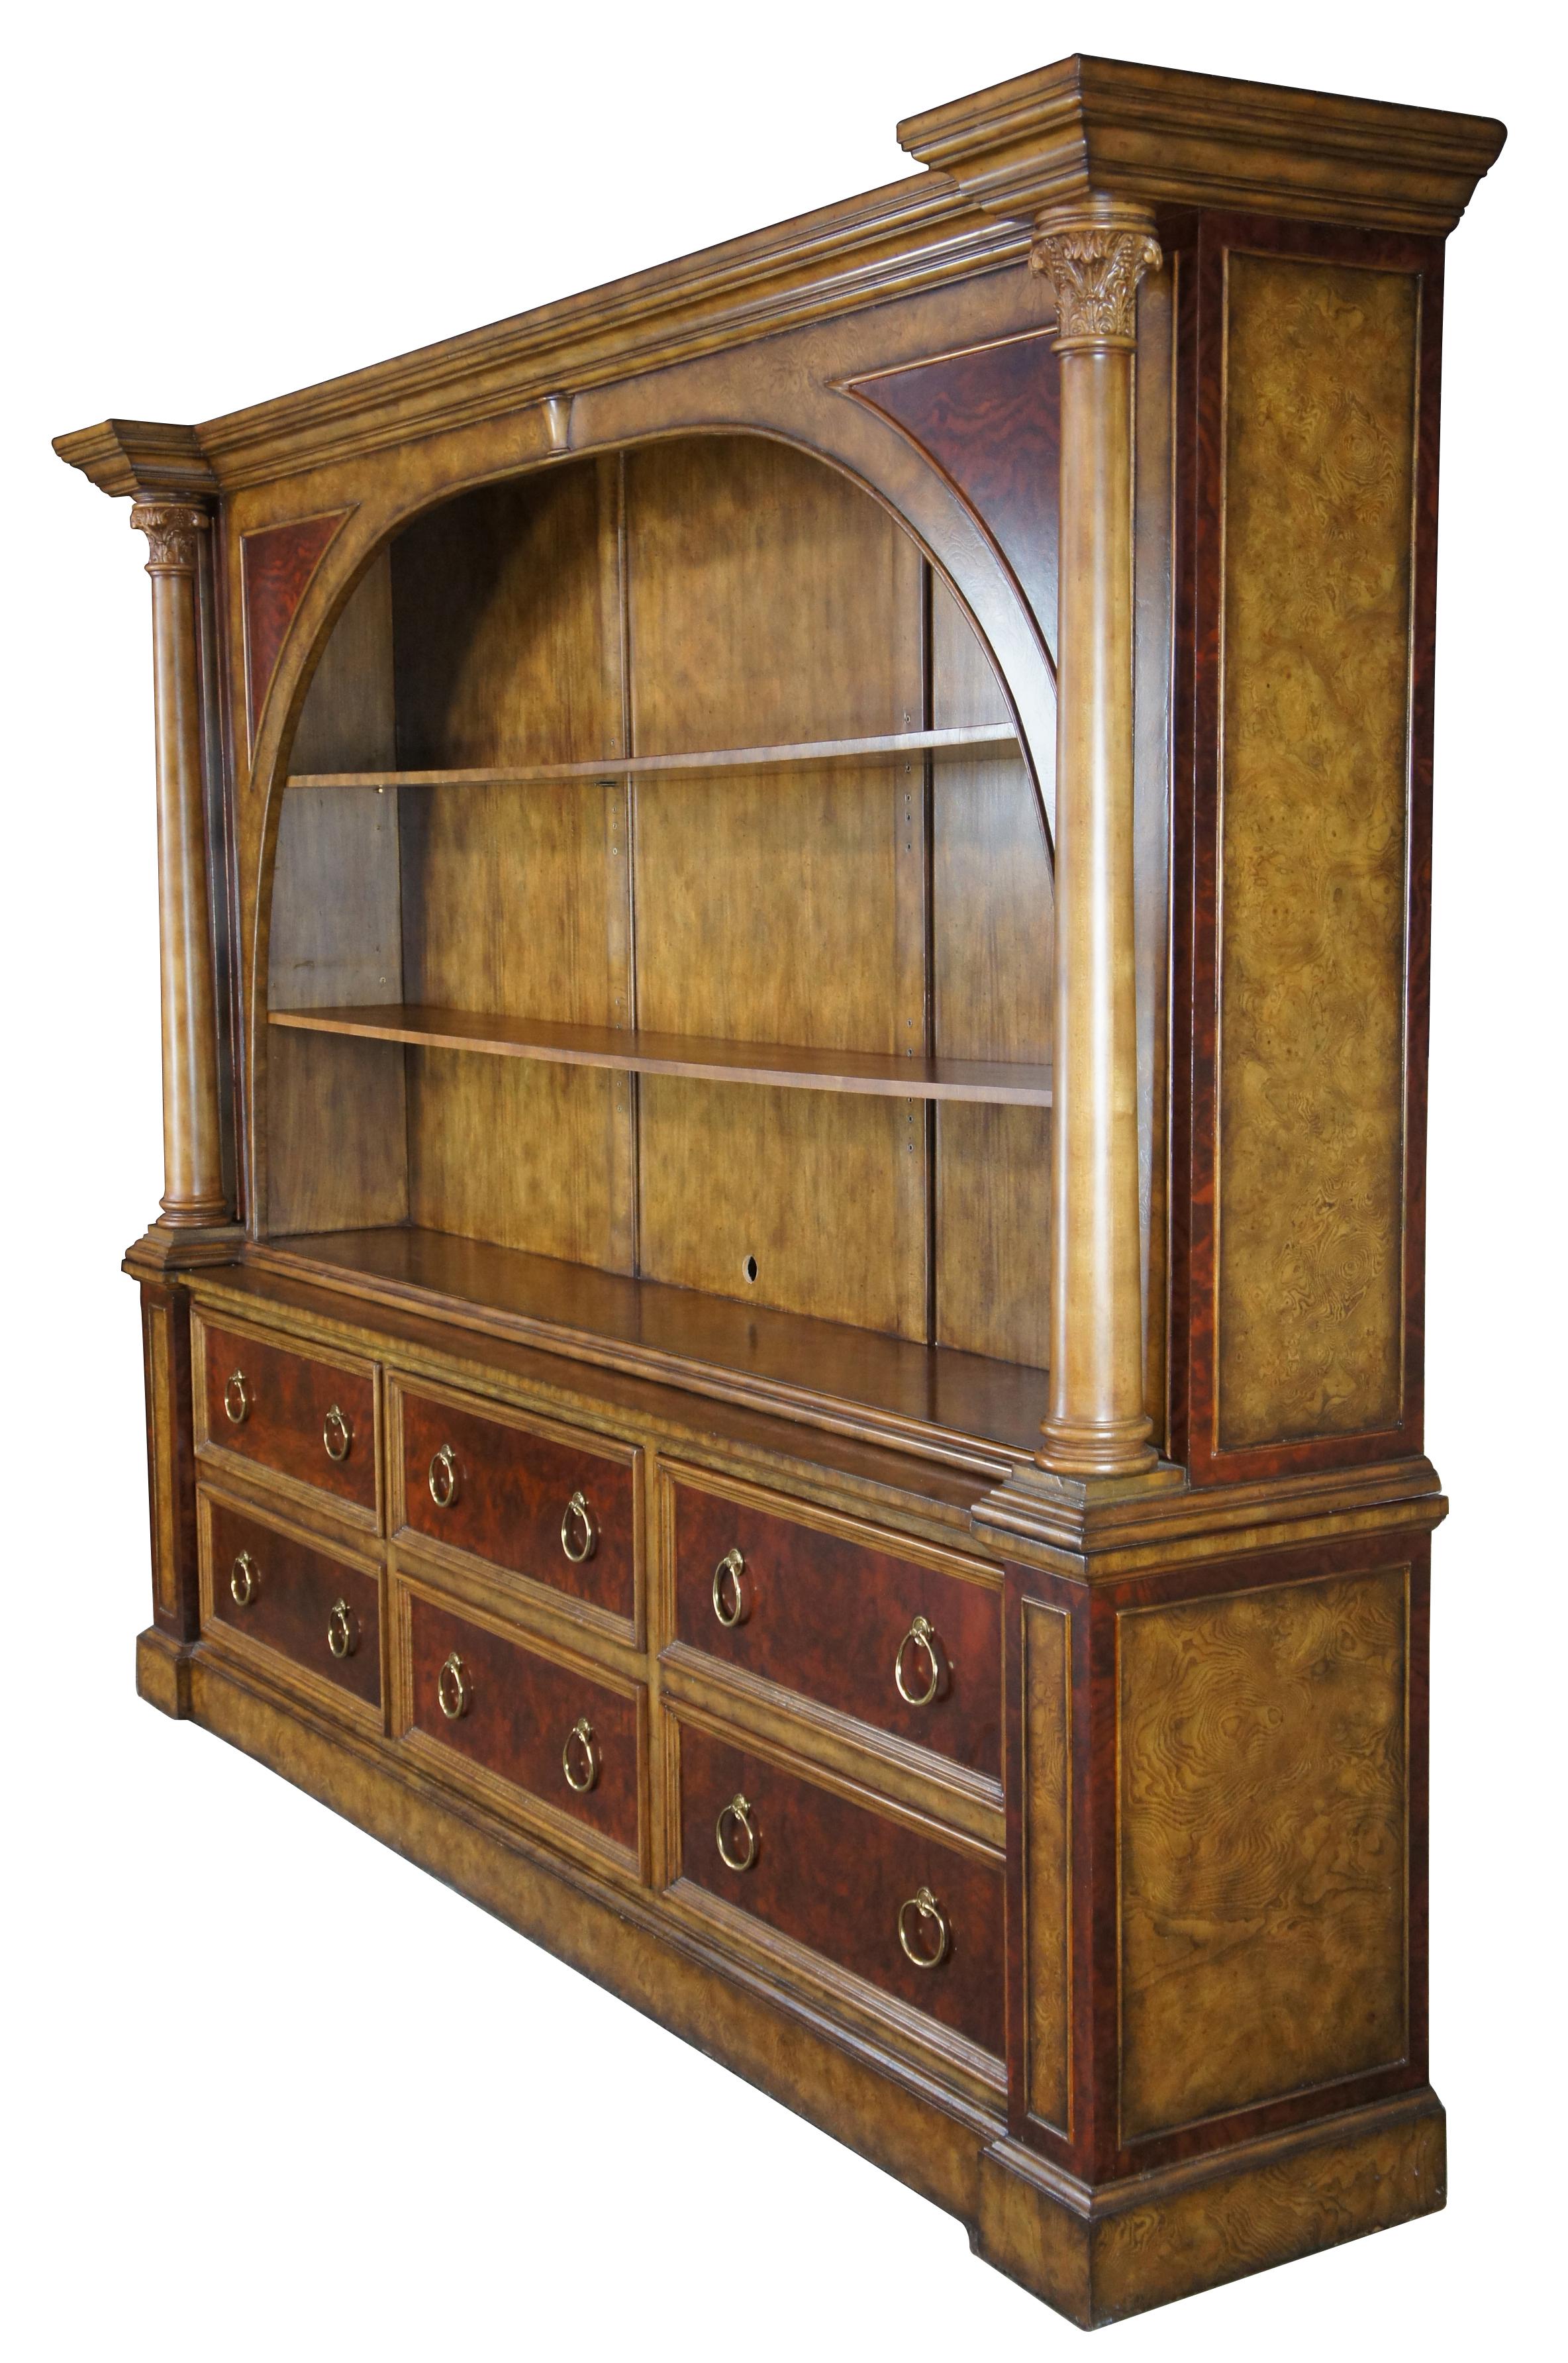 Neoclassical inspired bookcase by Maitland Smith. Features two concealed shelves behind and arched front with columns. Lower half includes six drawers with knocker pulls. Made from mahogany with burled ash. Measures: 110”.
  